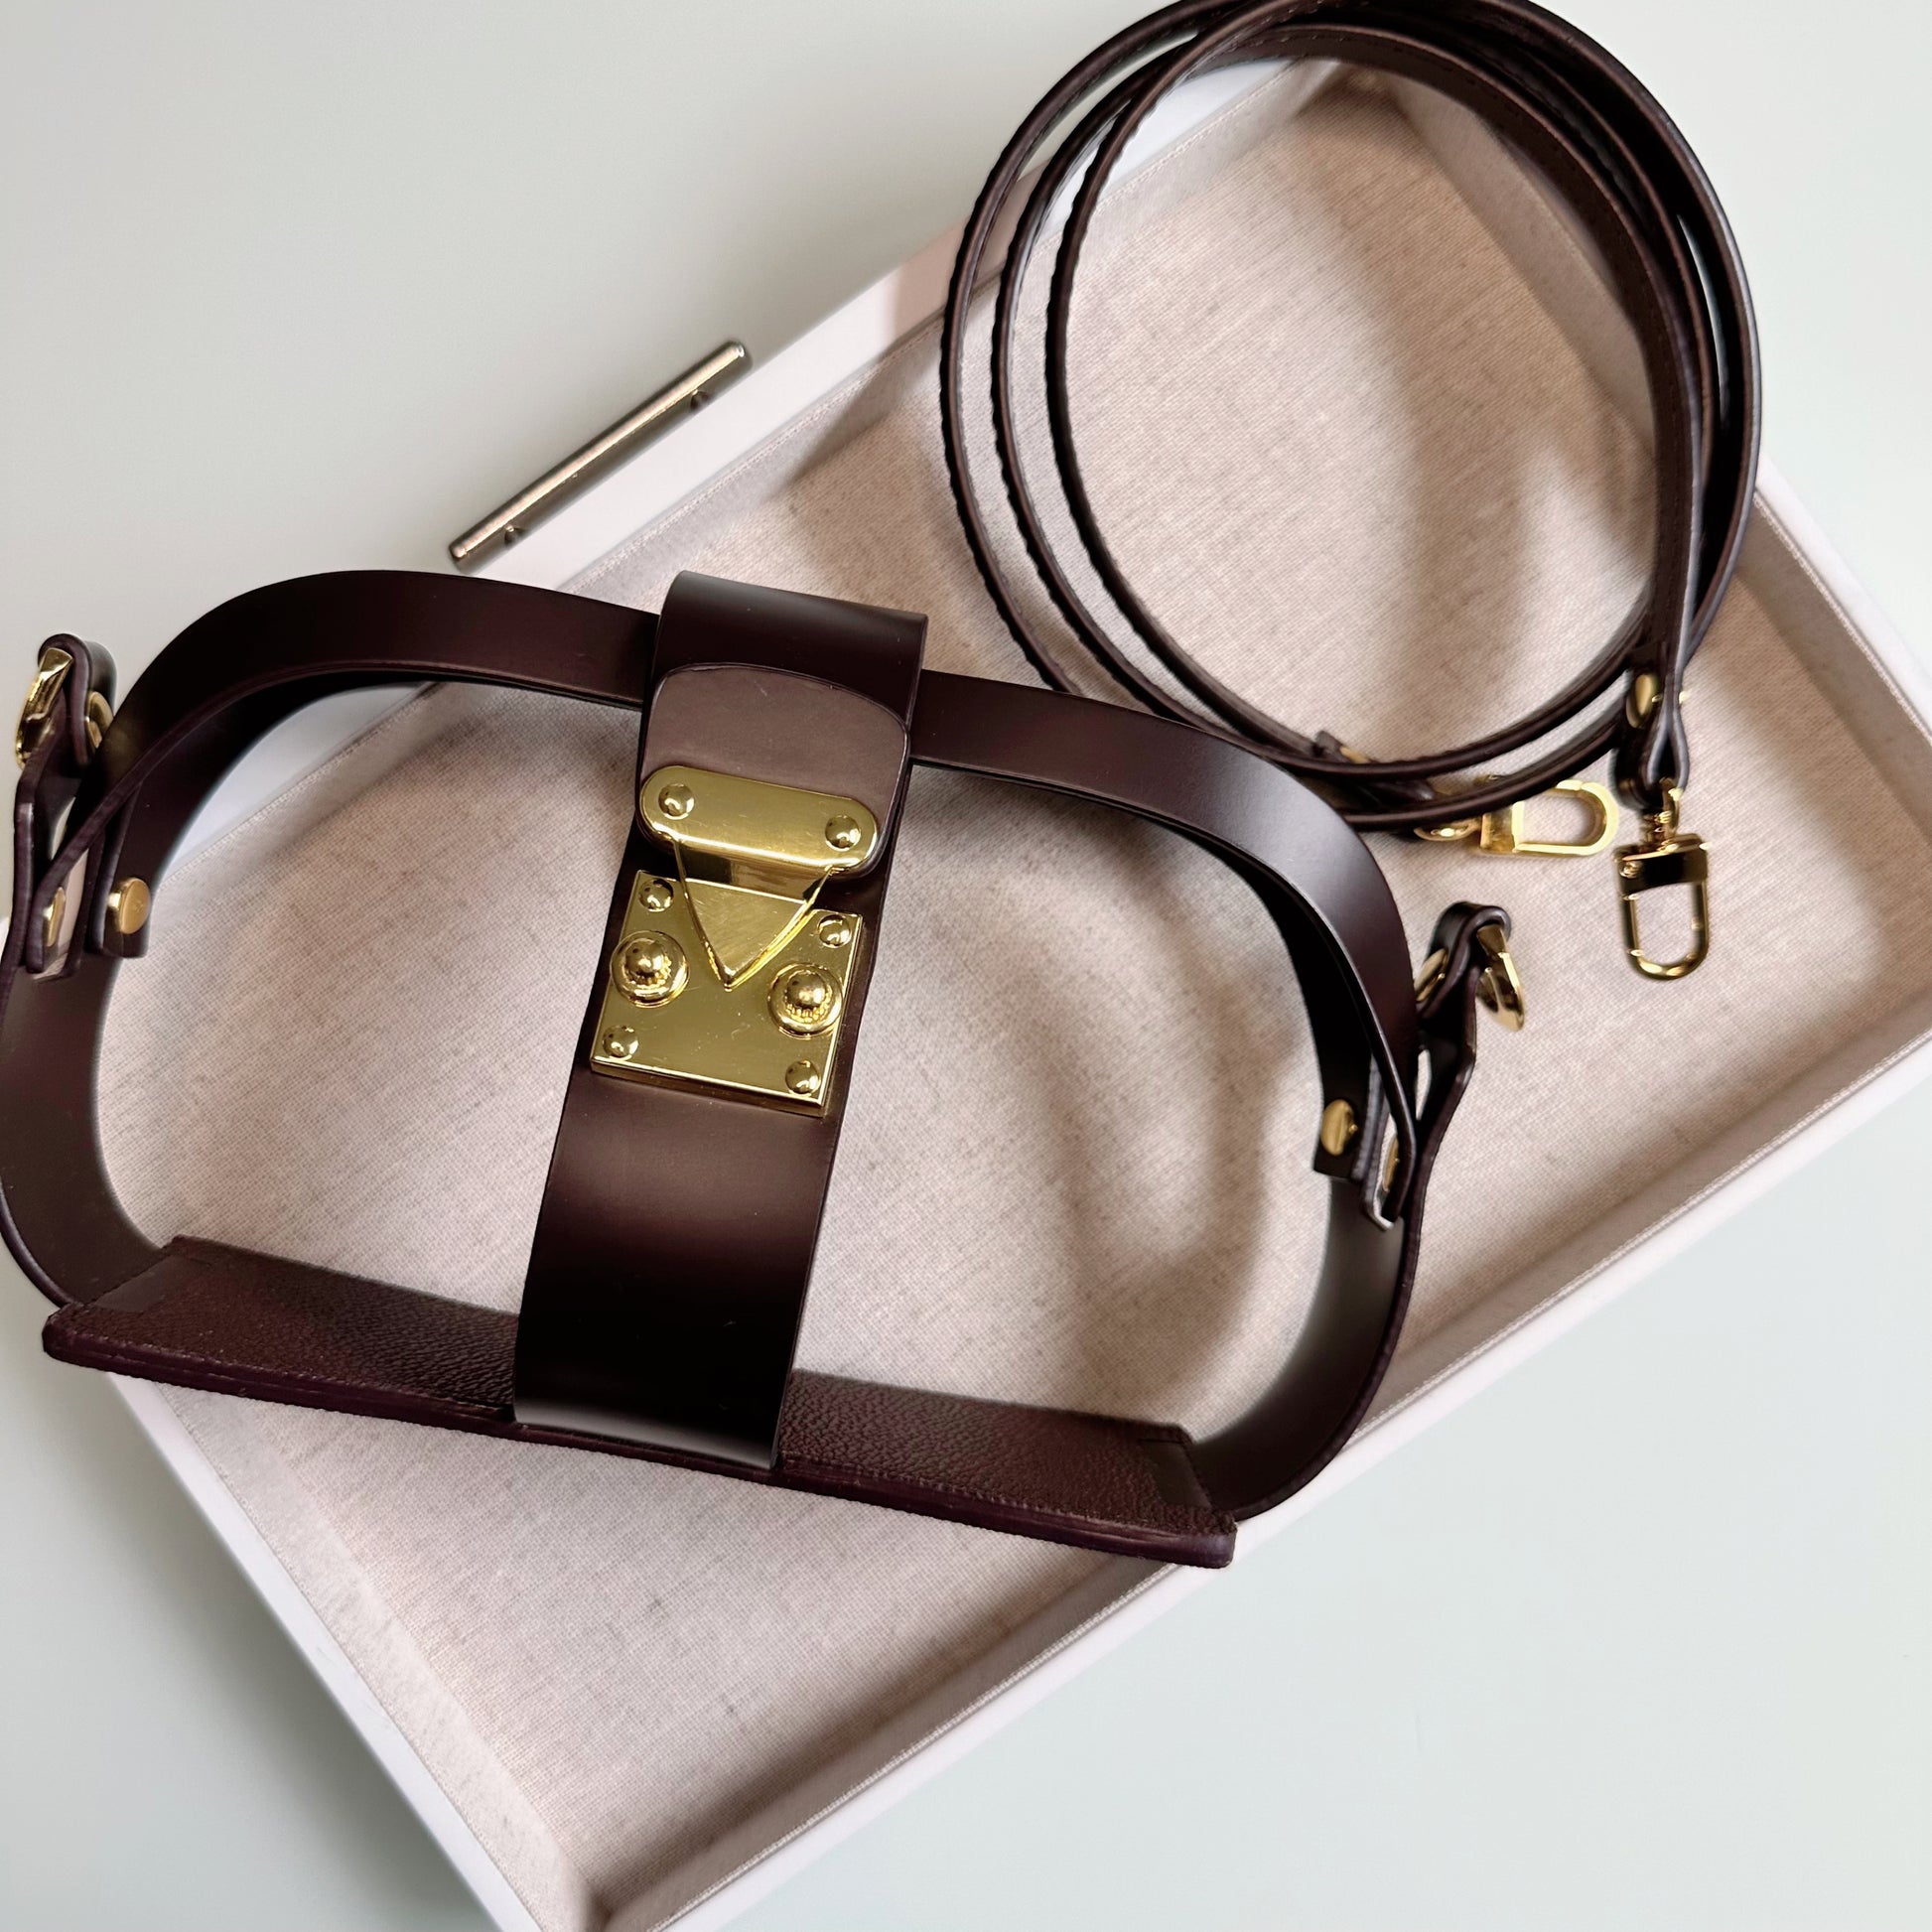 How To Transform the Louis Vuitton Cosmetic Pouch Into a Mini Bag